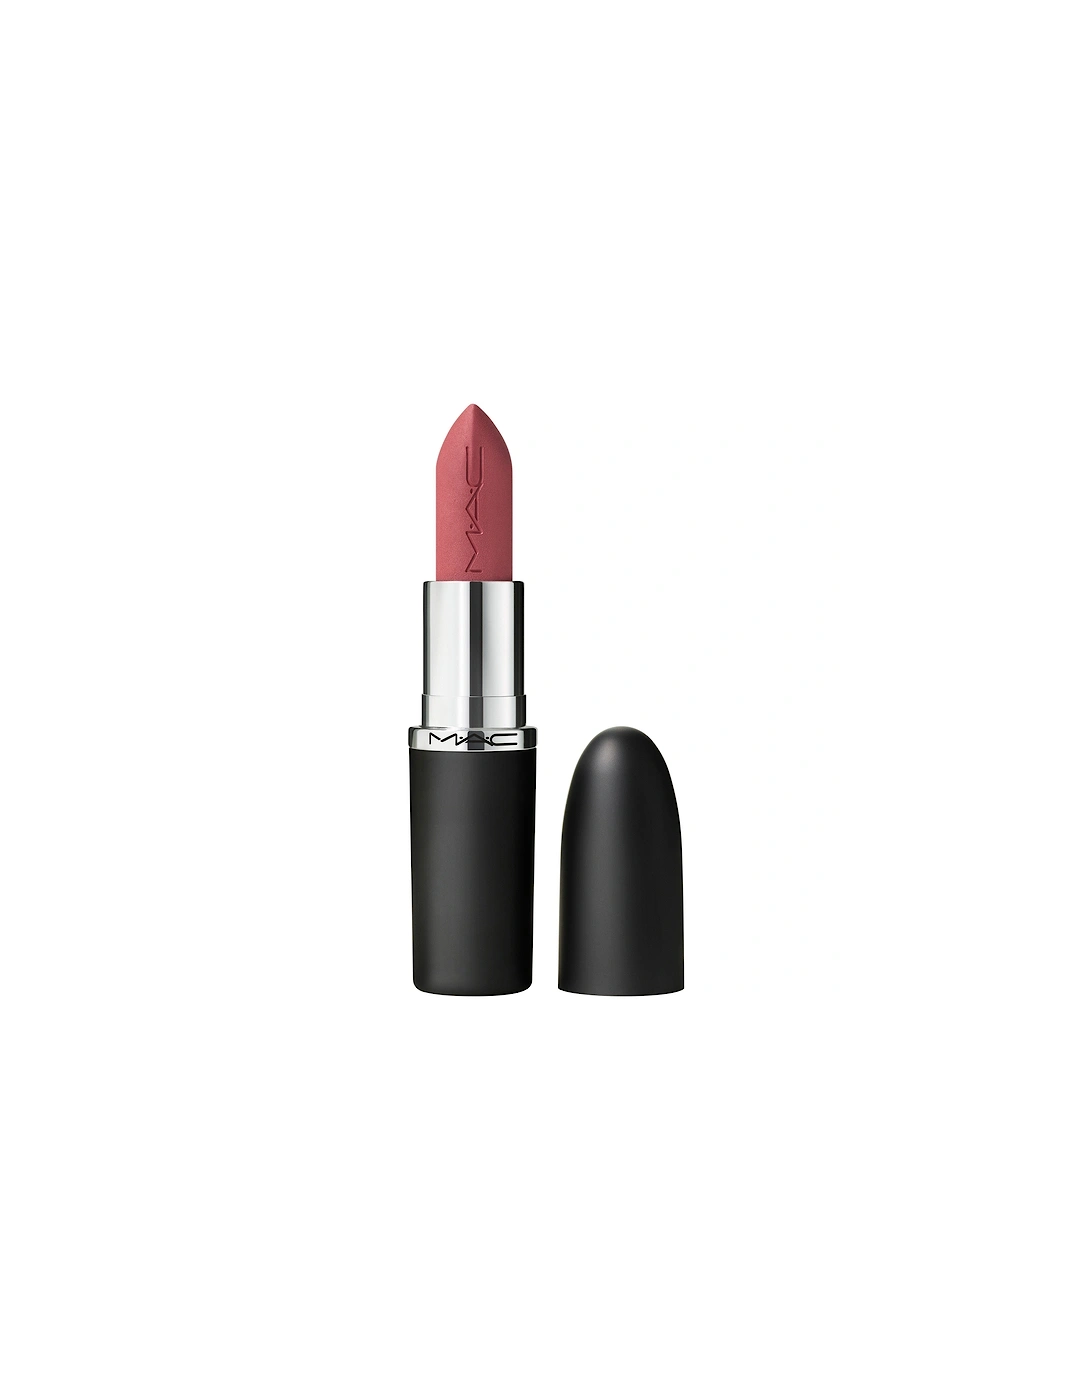 Macximal Matte Lipstick - You Wouldn't Get it, 2 of 1